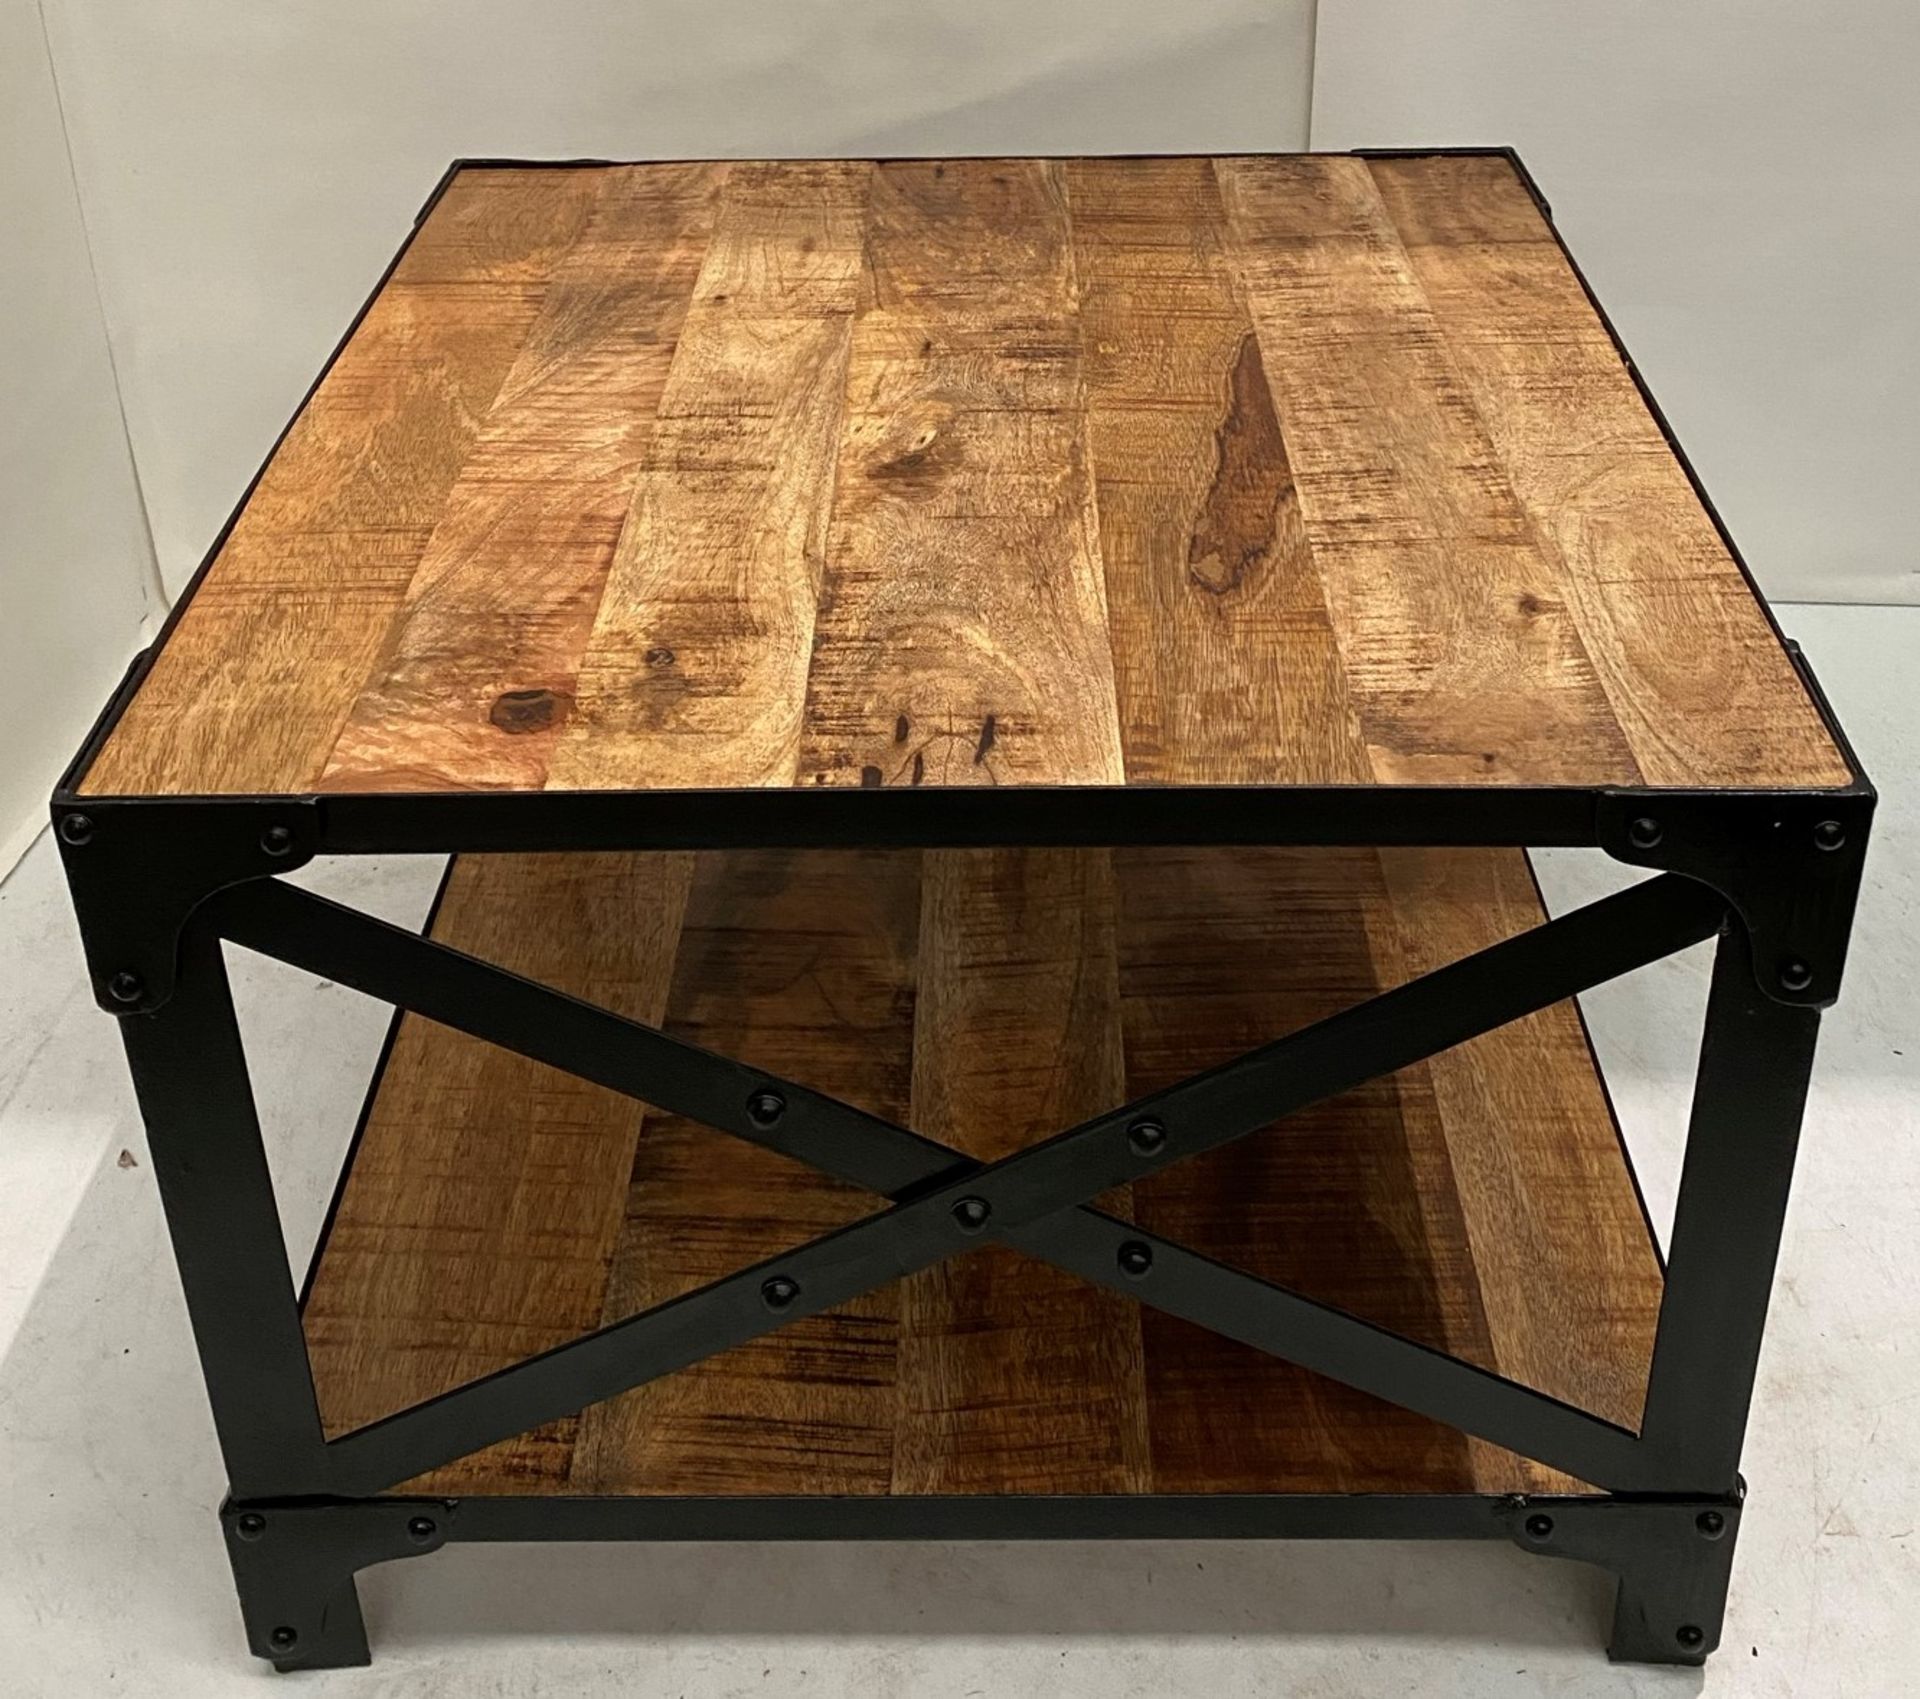 An Industrial coffee table with wooden top and black metal frame - 600mm x 600mm - Image 2 of 6